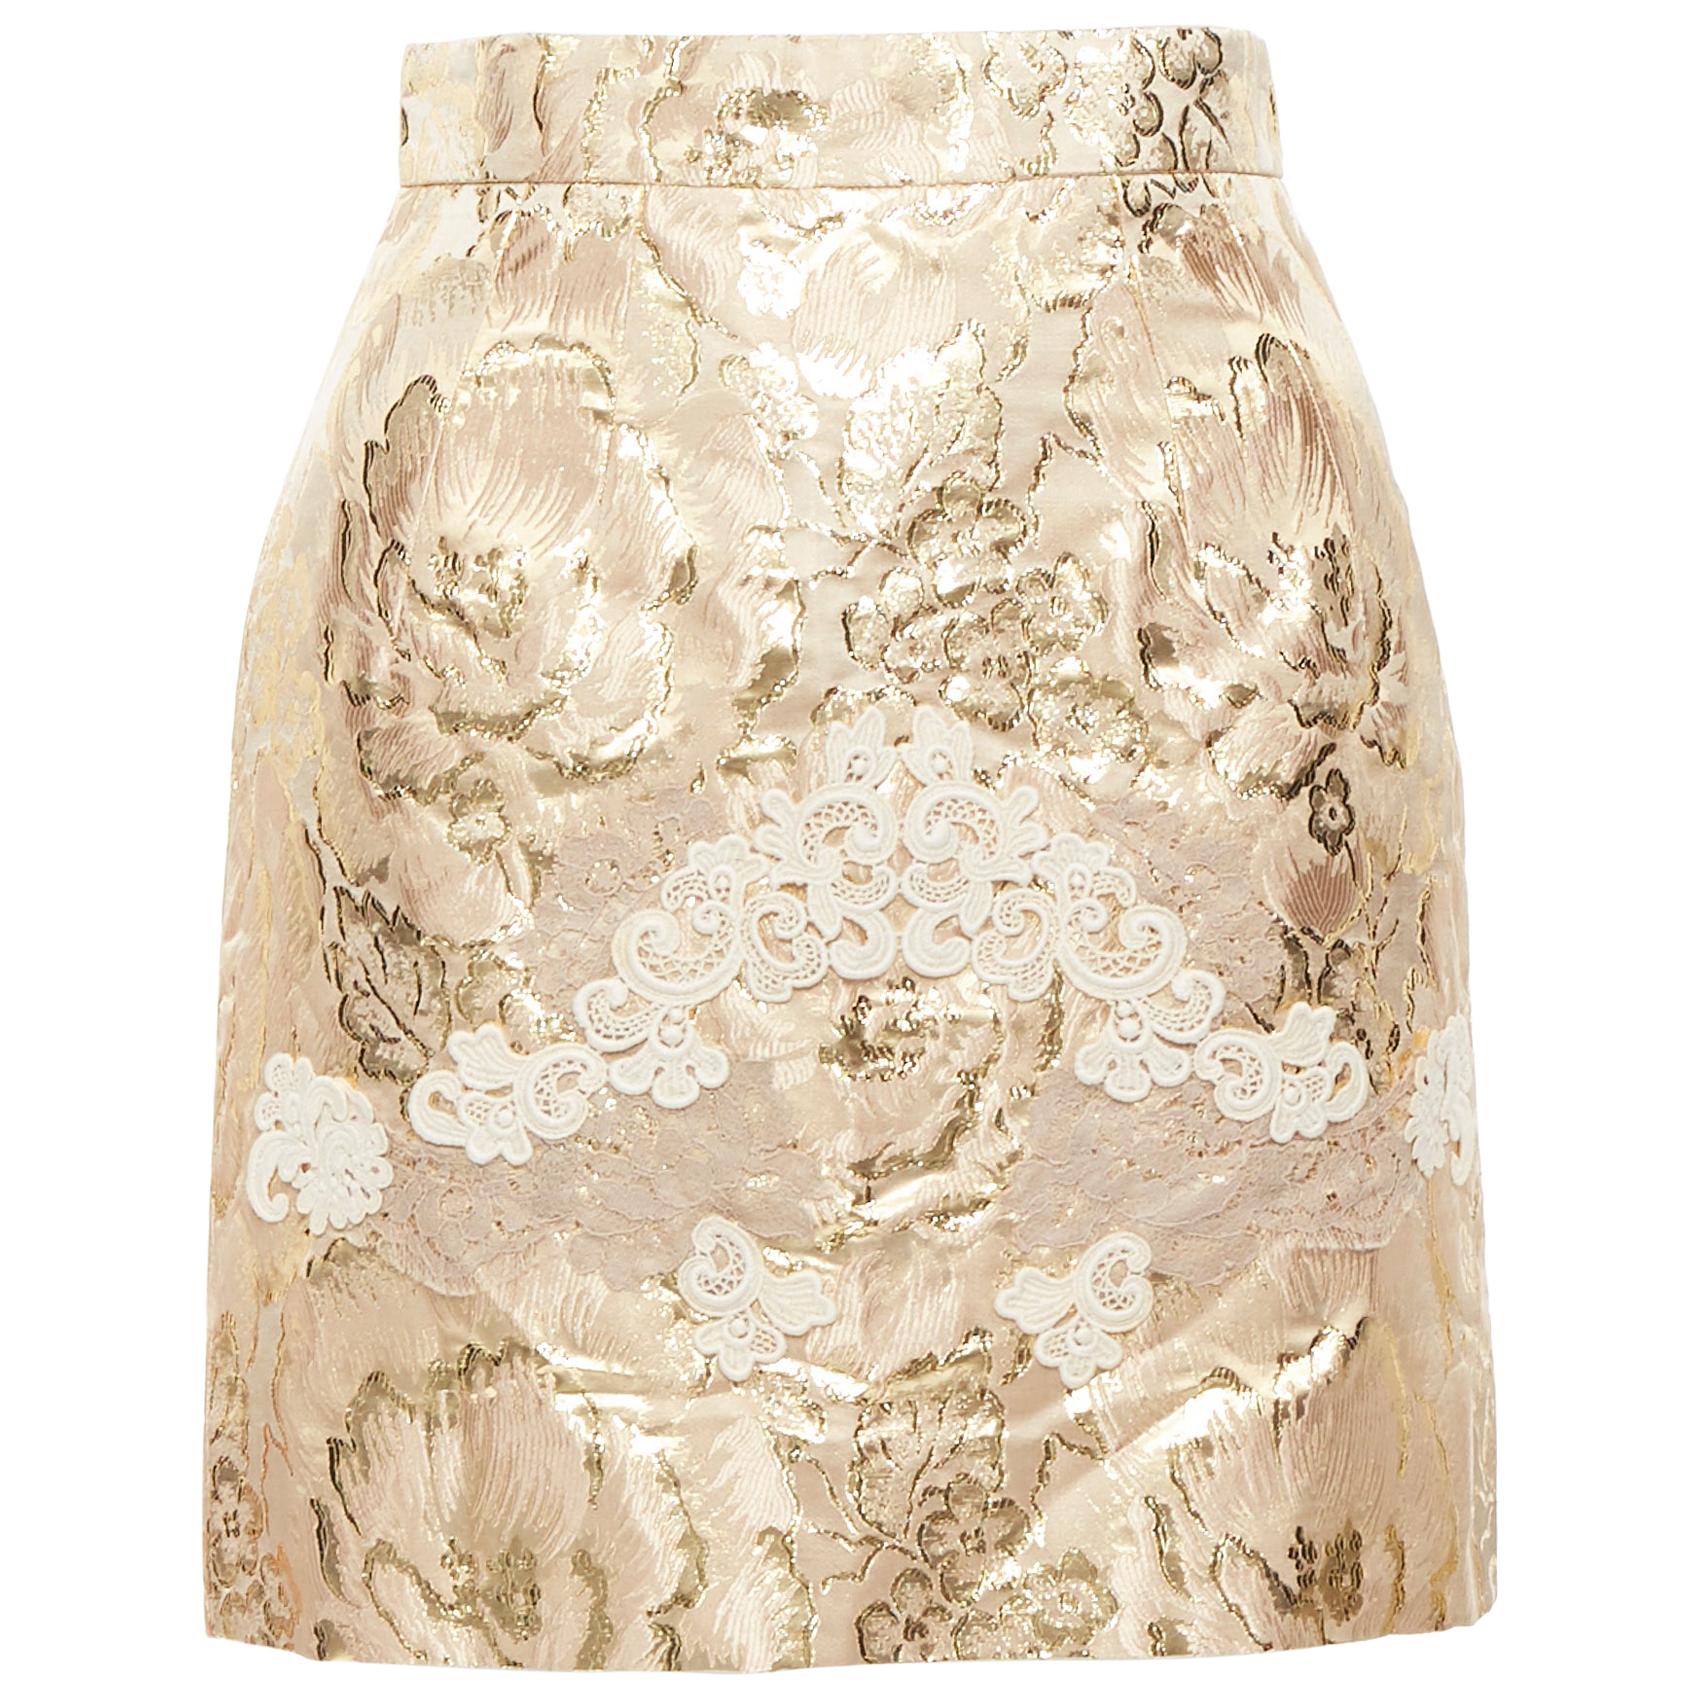 new DOLCE GABBANA metallic gold lace applique floral brocade fitted skirt IT36